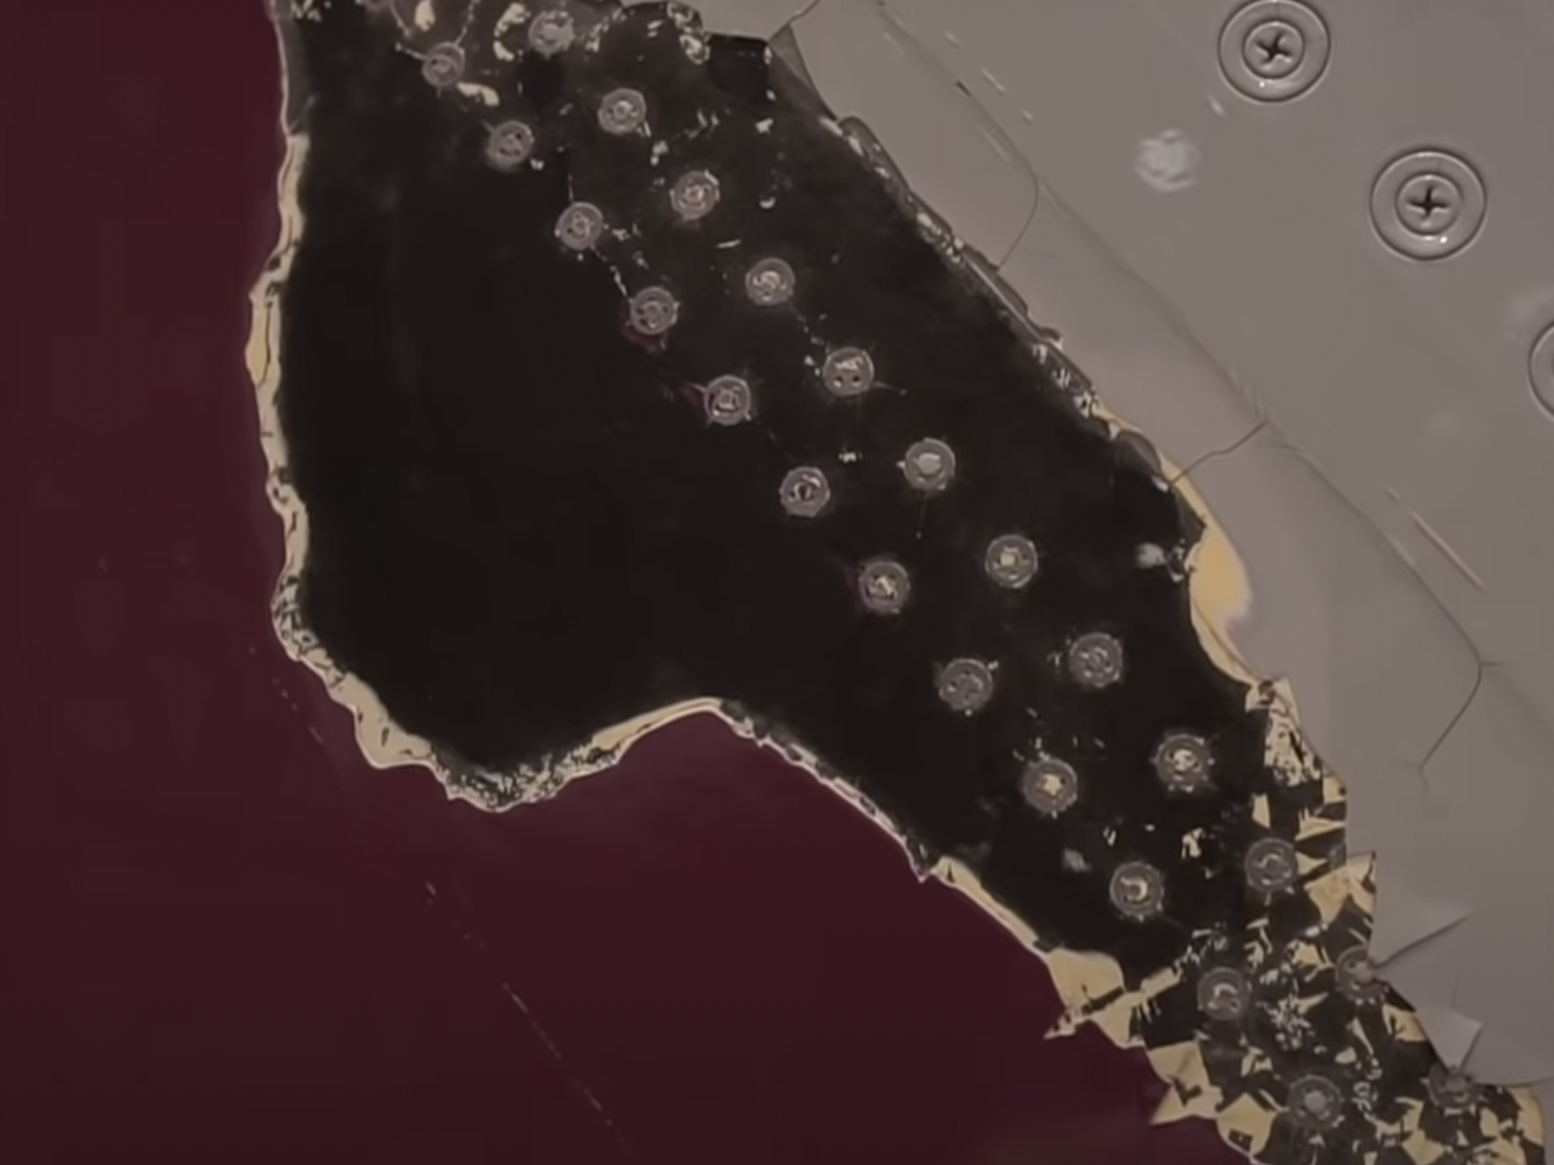 Screenshot of surface paint issues on Qatar's A350 aircraft from a full video showing the defects.